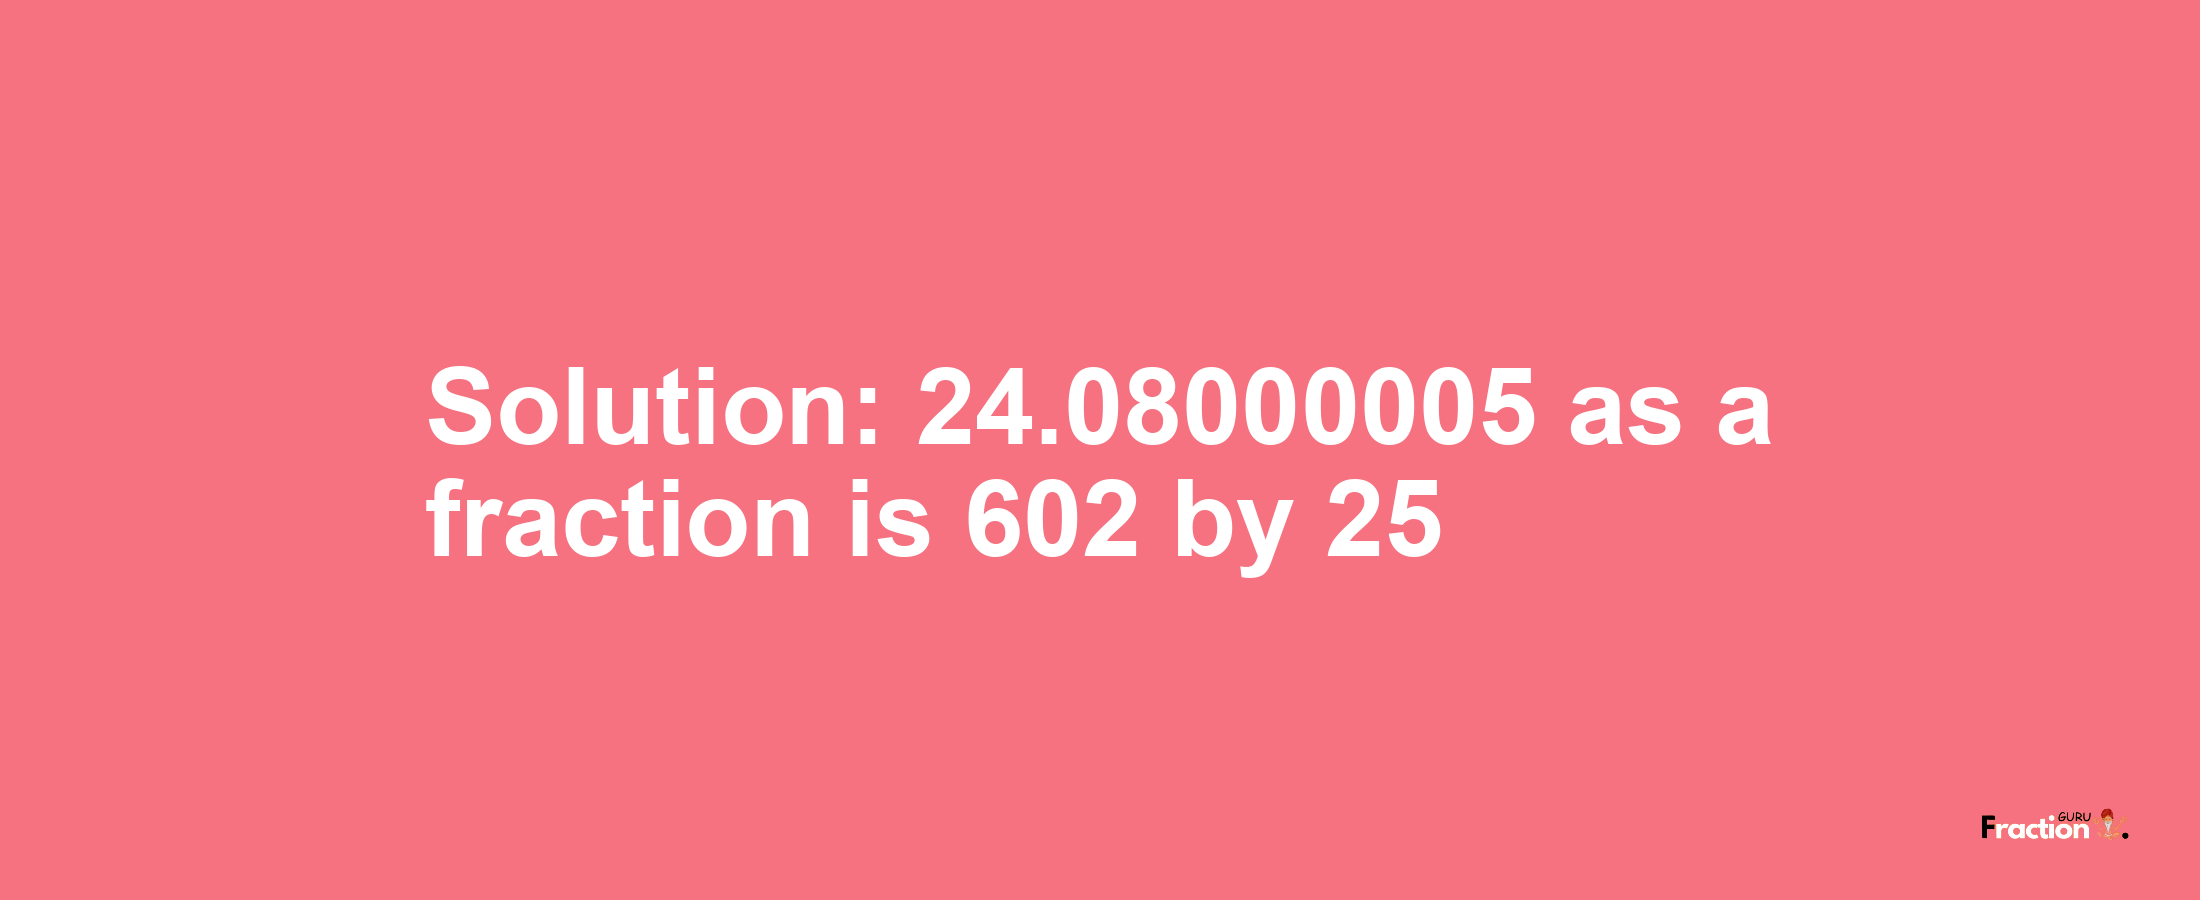 Solution:24.08000005 as a fraction is 602/25